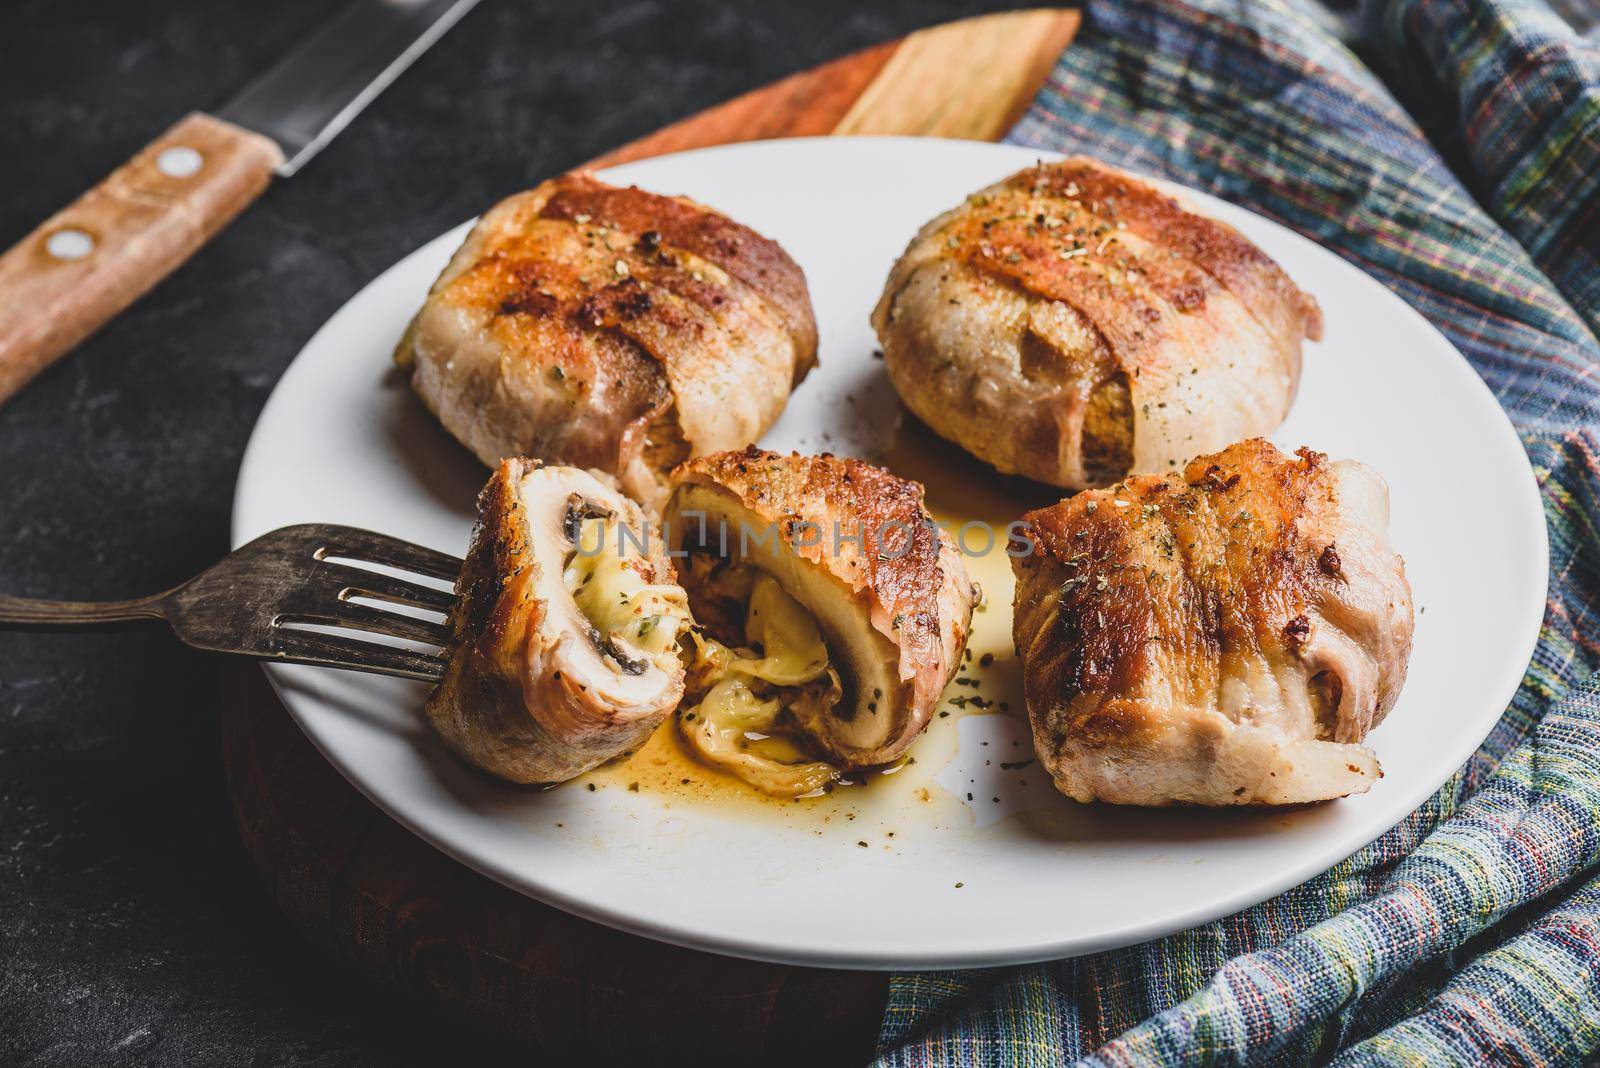 Bacon-wrapped button mushrooms stuffed with grated cheddar cheese and spices